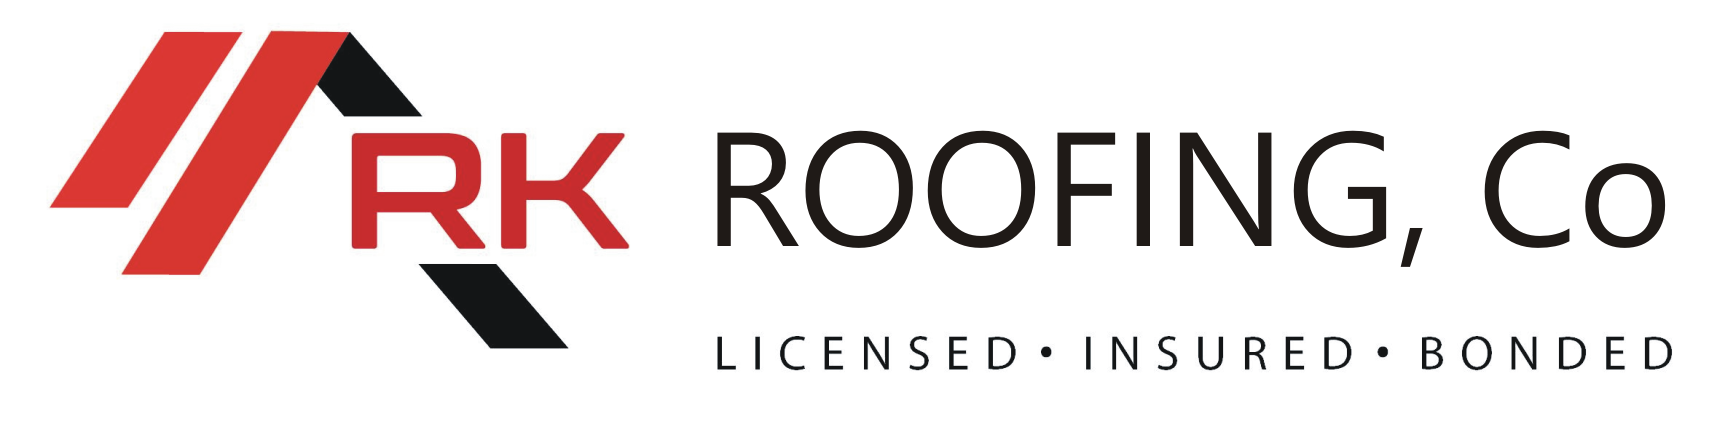 RK Roofing Contractors Chicago – Local Roofing Company